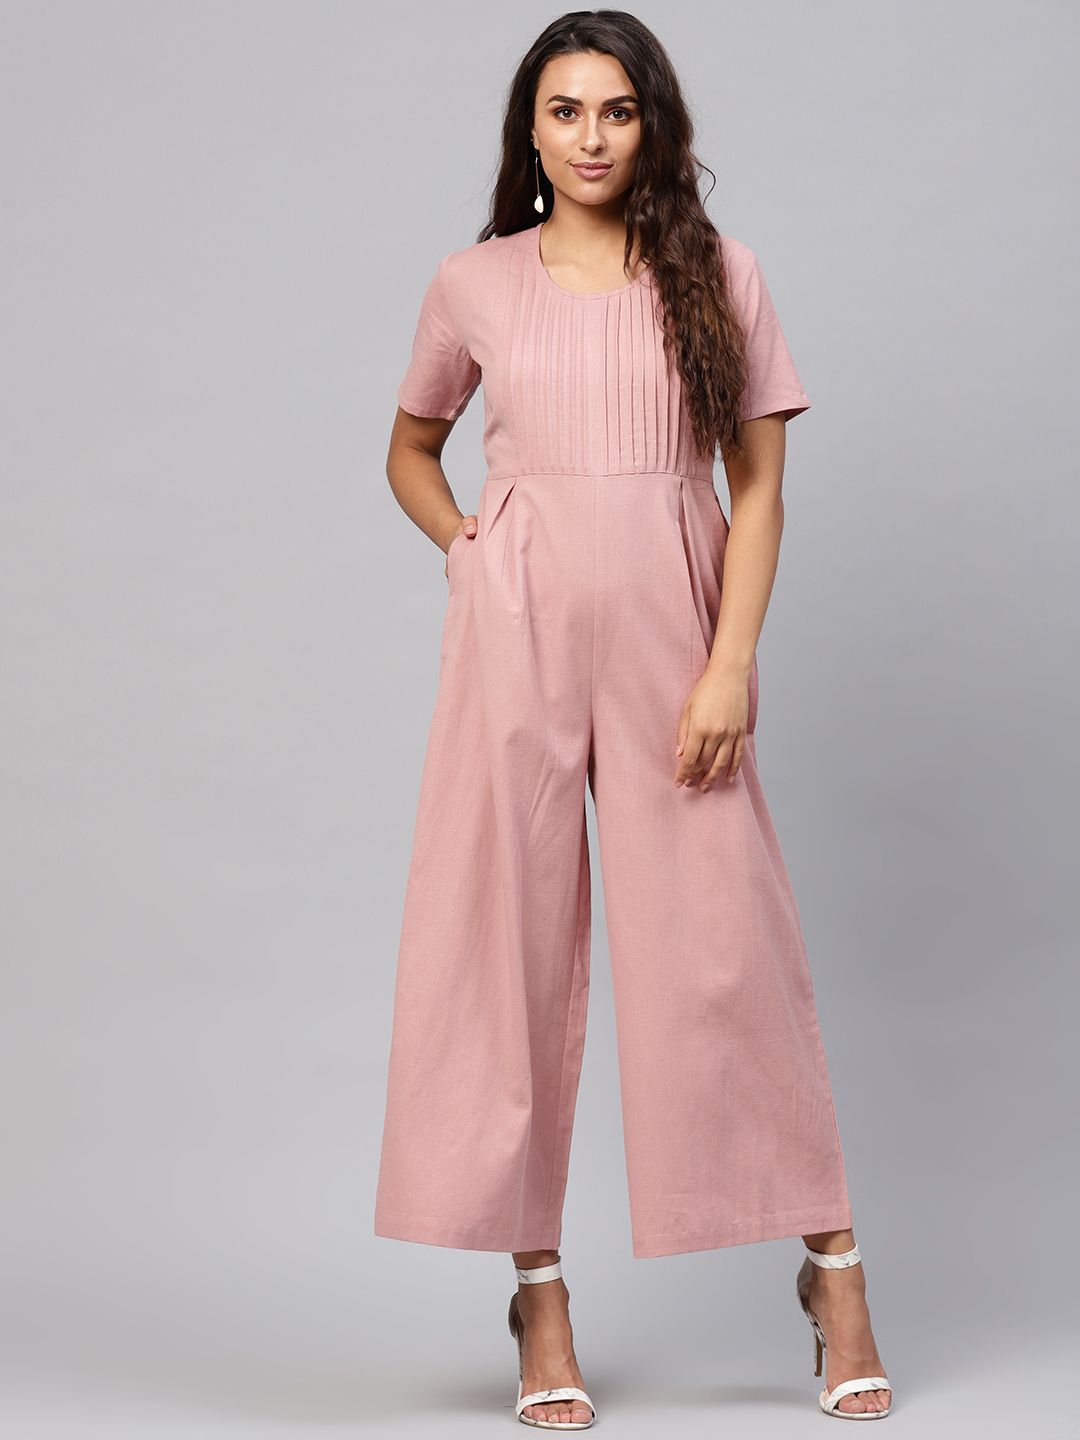 SASSAFRAS Dusty Pink Solid Basic Jumpsuit Price in India